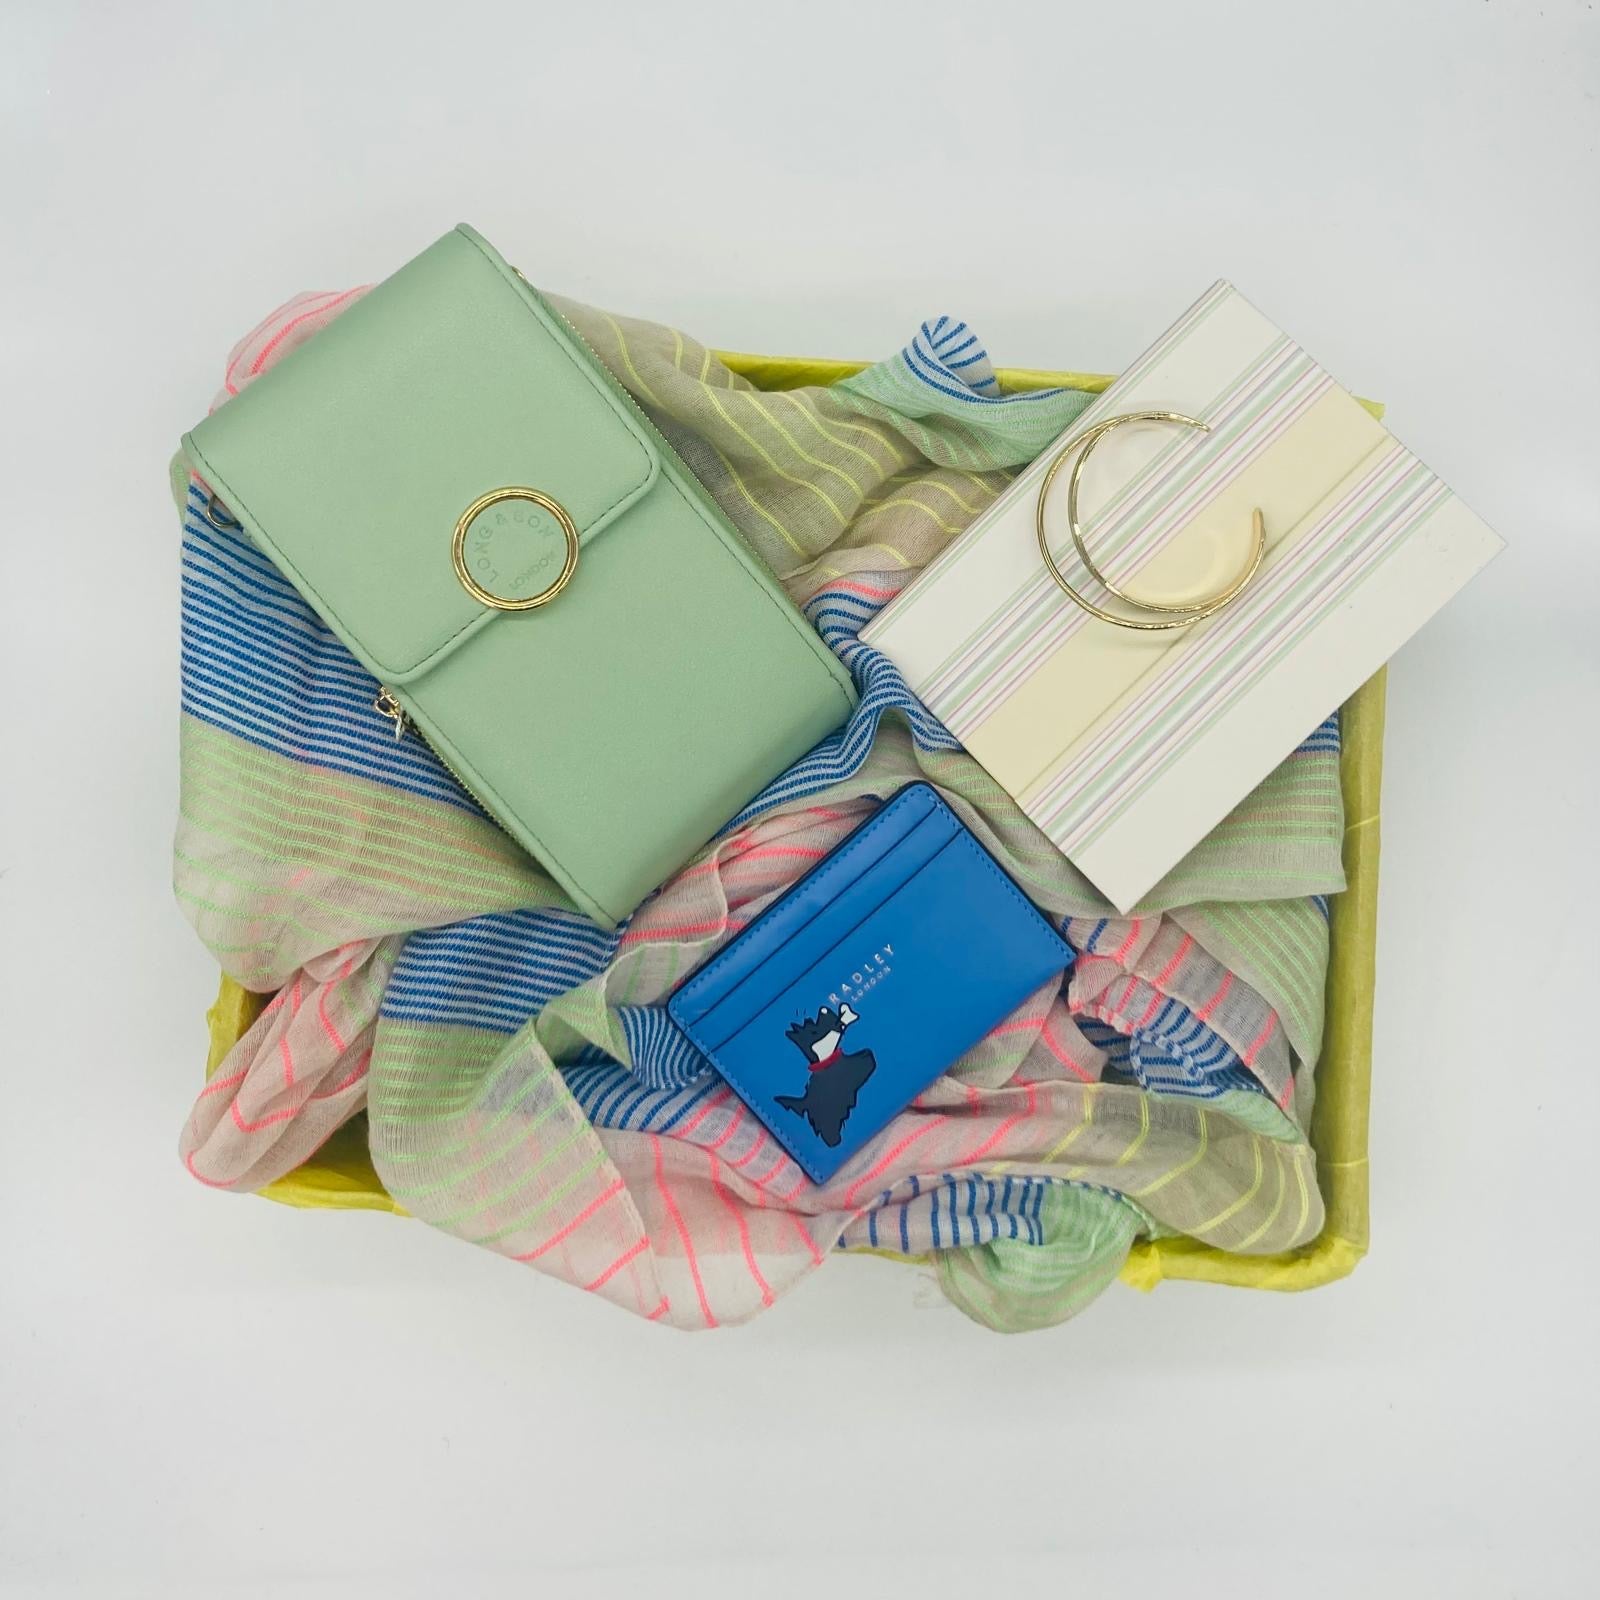 'Paralell pastels' (as new accessory box!)